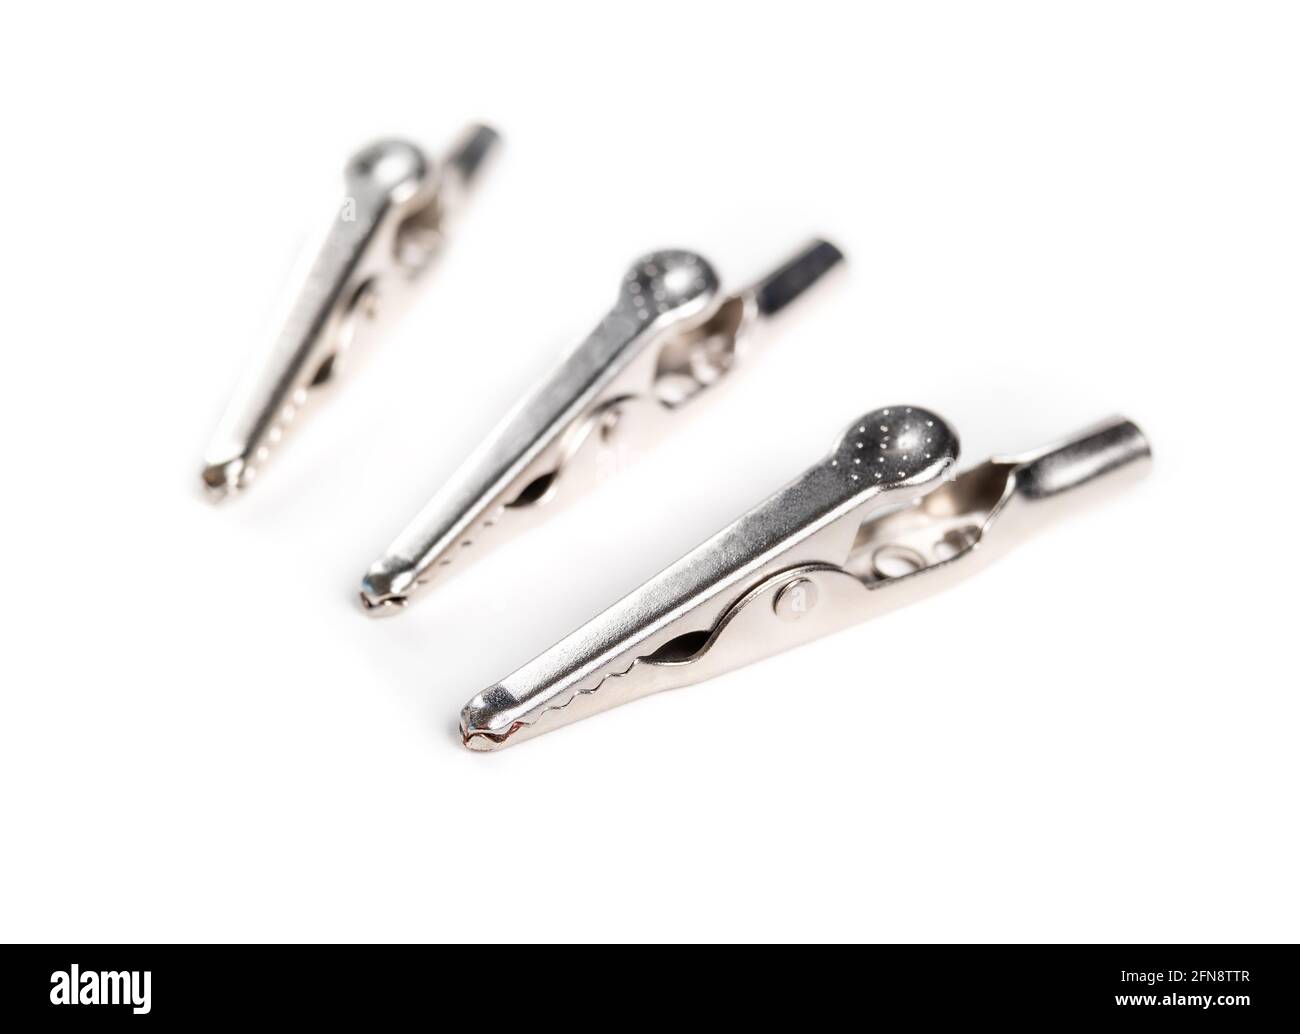 Group of alligator clips or craft wire clips. Perspective view. Used for  creating a temporary electrical connection or for crafts holding photos,  memo Stock Photo - Alamy